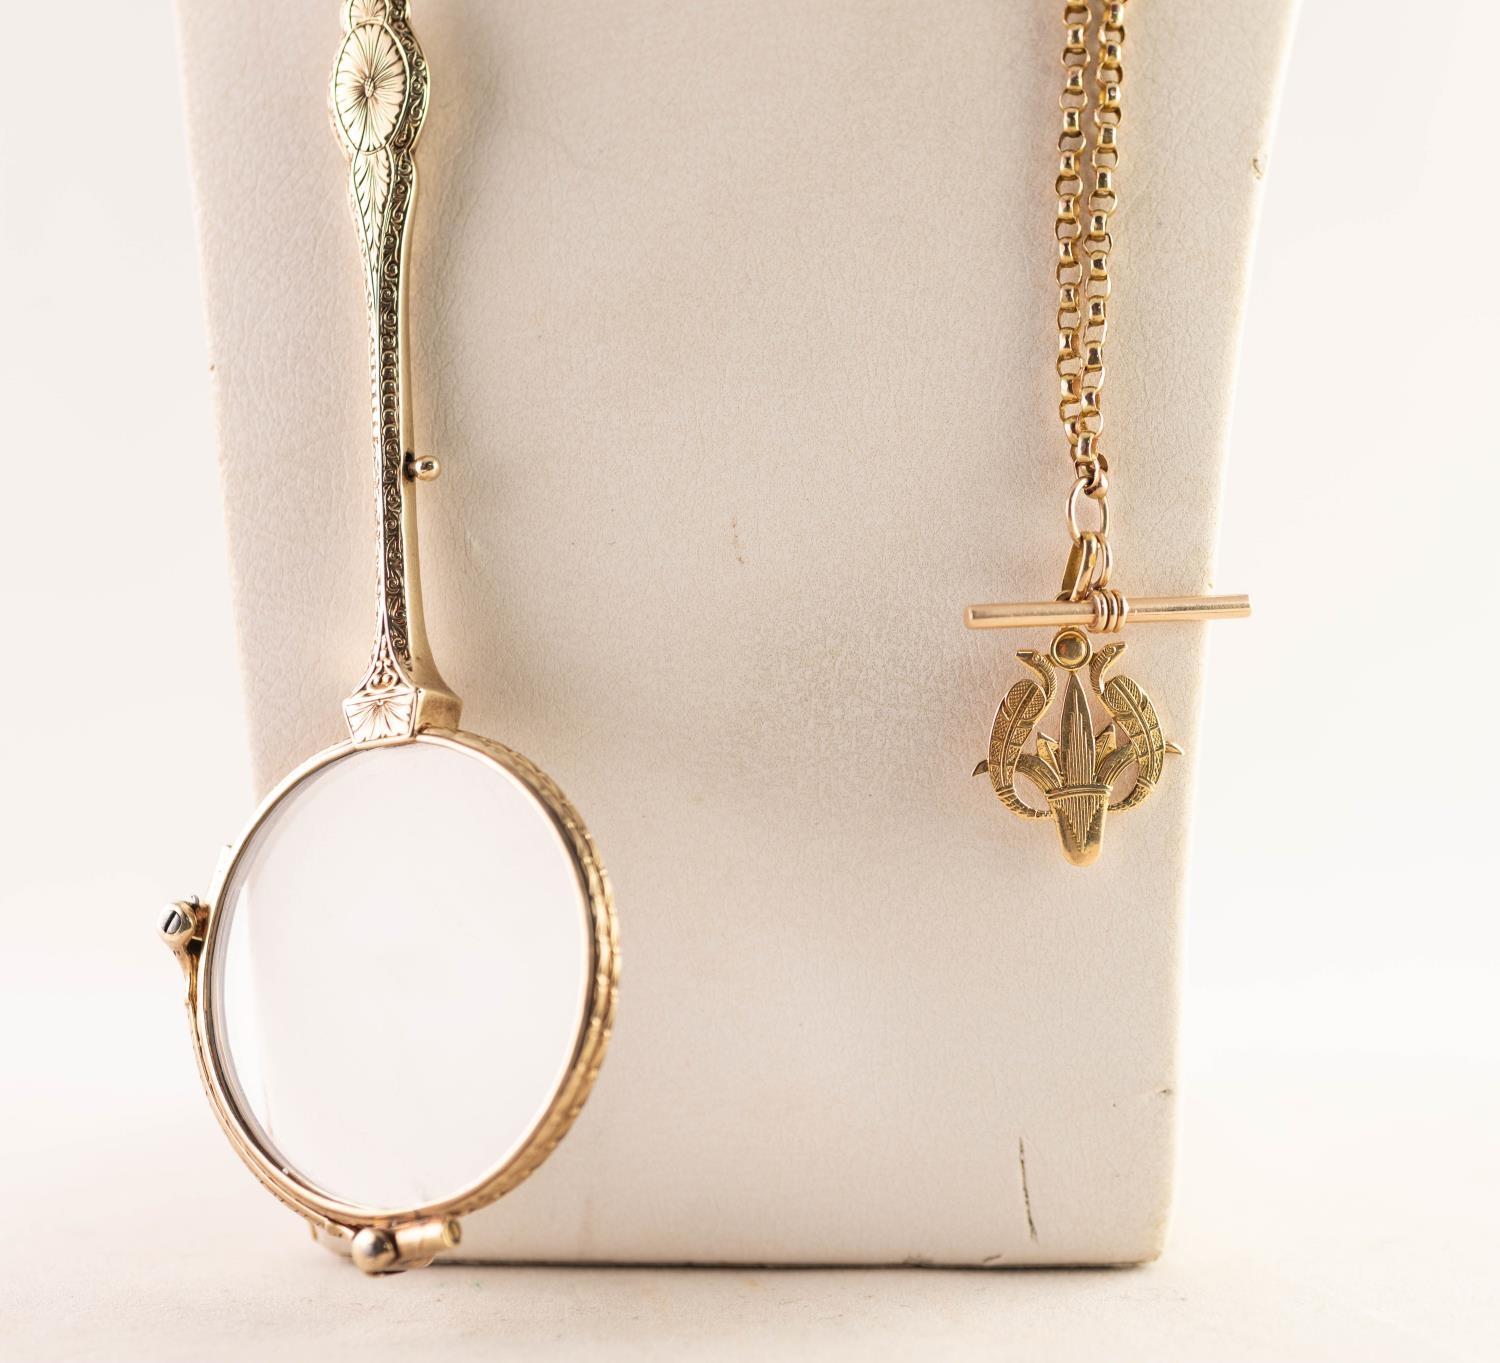 9ct GOLD LORGNETTE with ornately chased handle and ring hanger, 15.9gms gross, on a LONG 9ct GOLD - Image 2 of 2